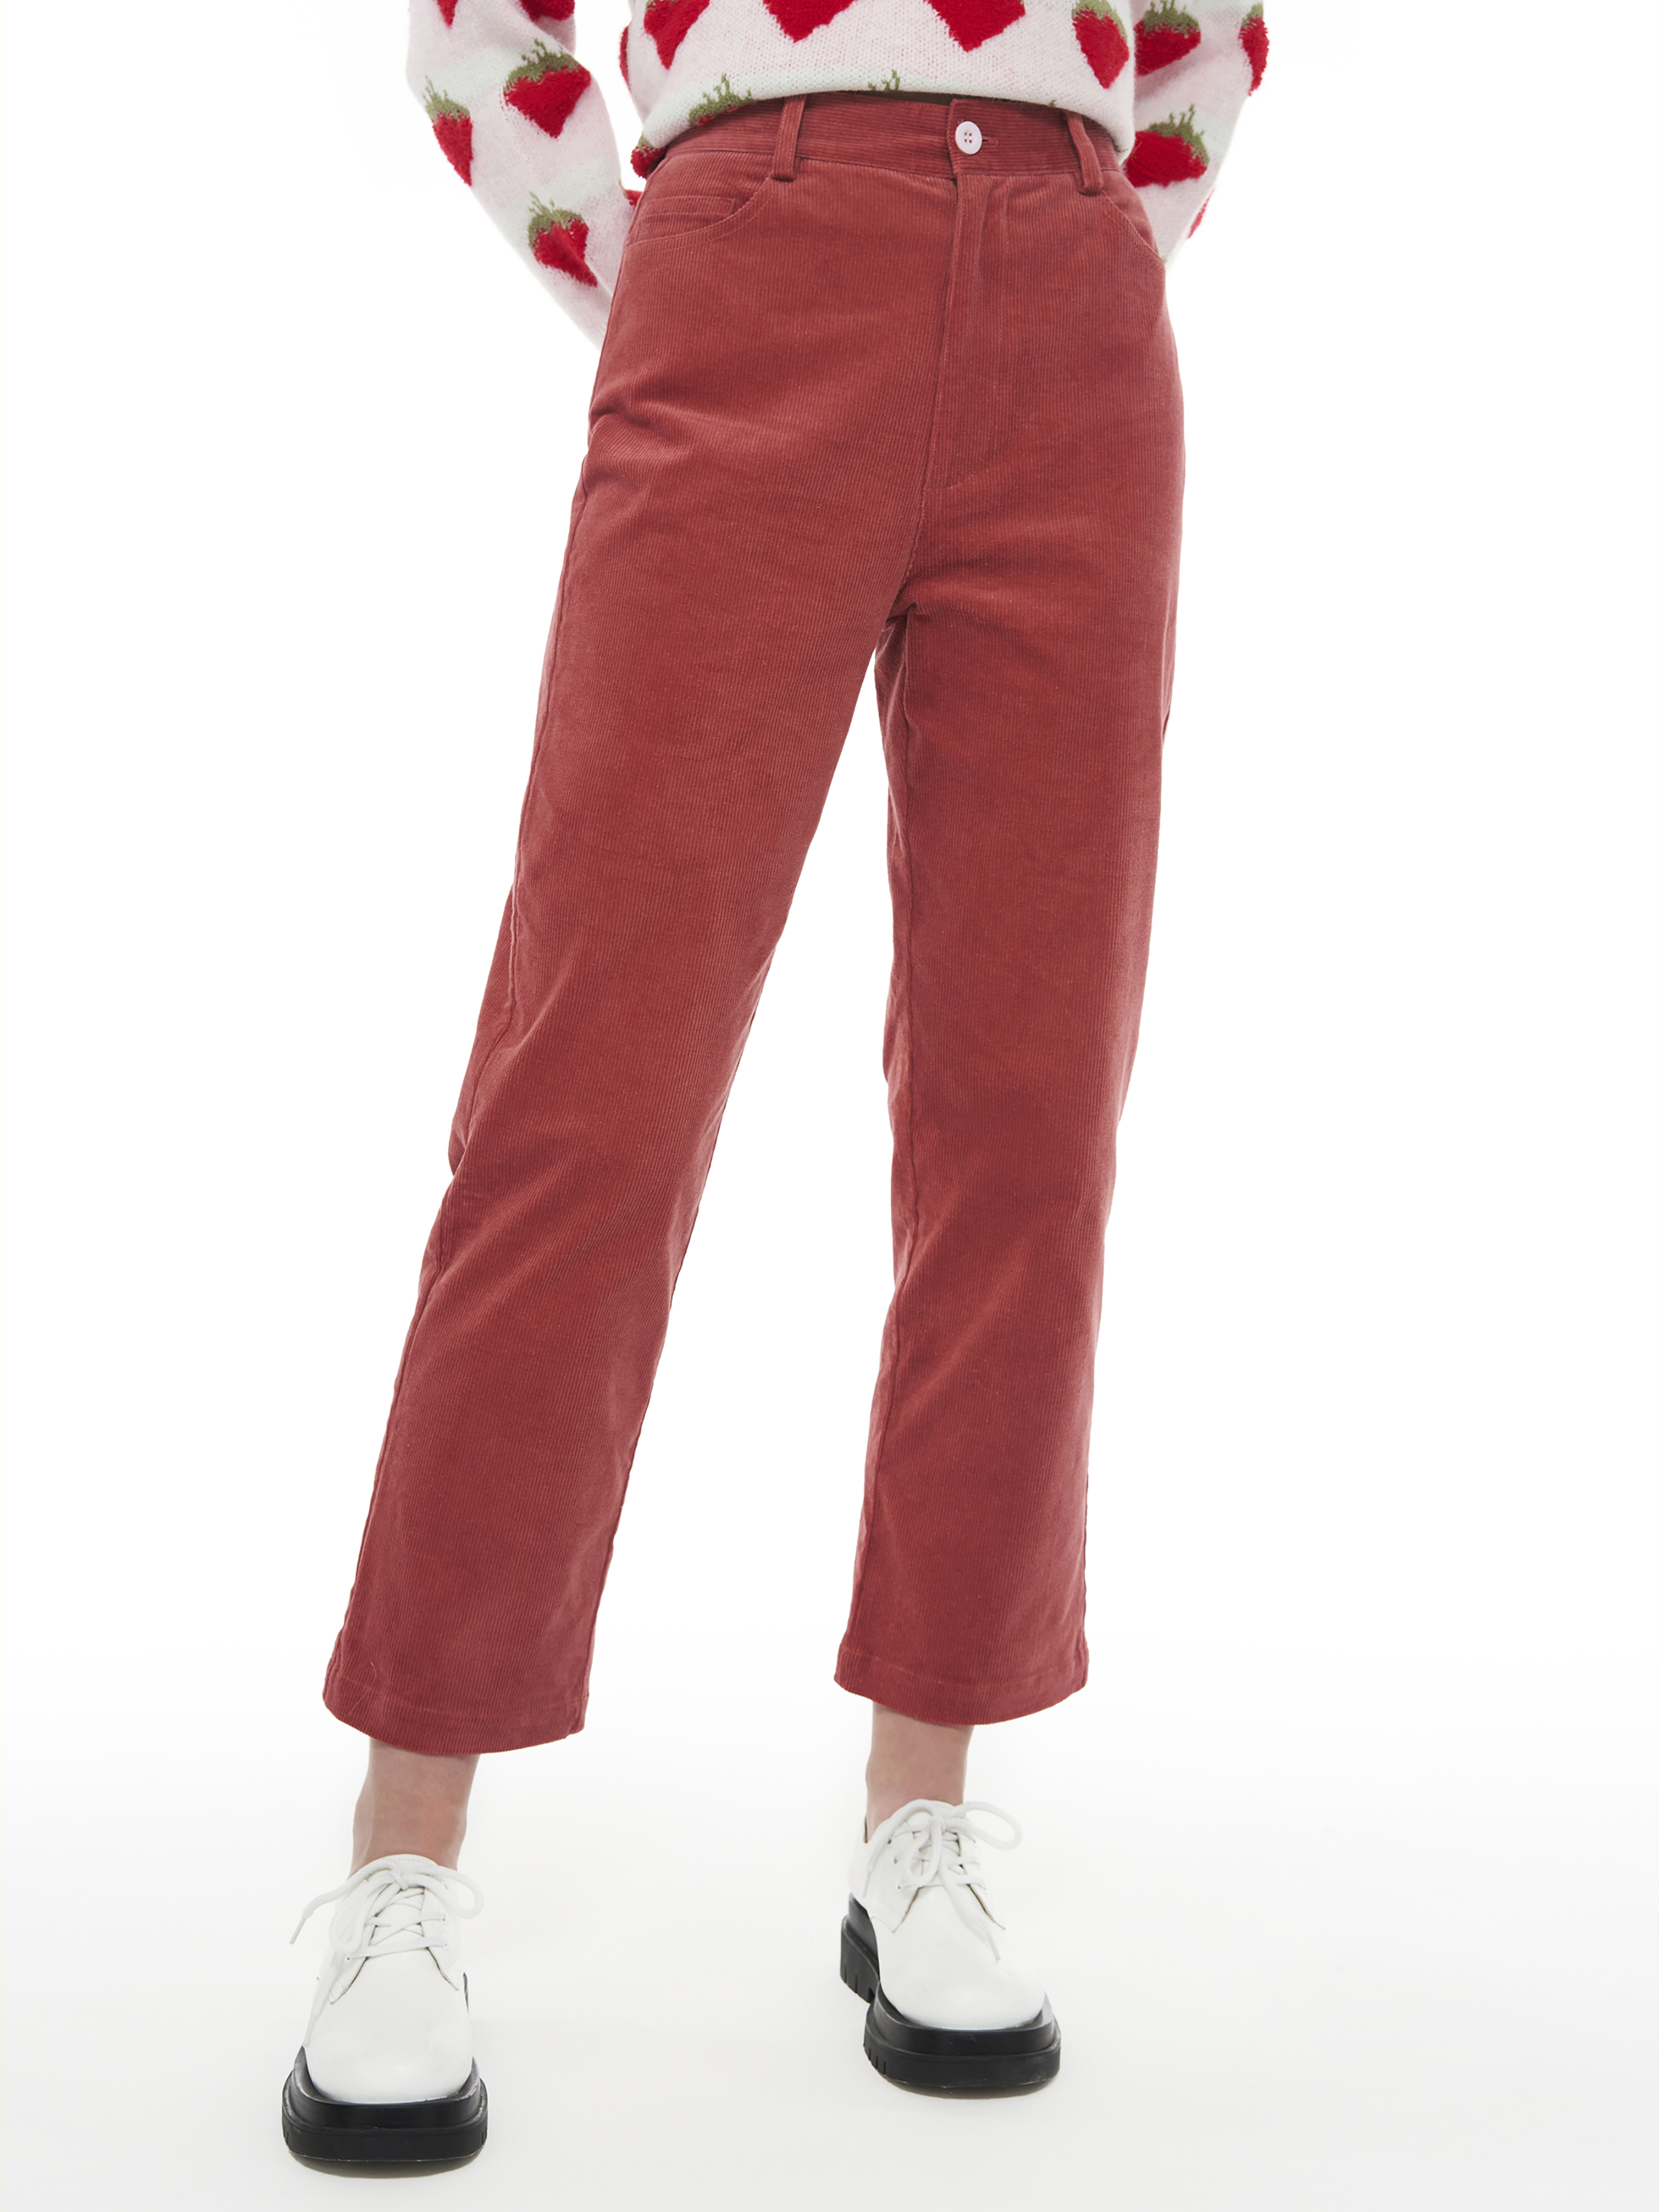 Womens Fine Cord Trousers Cropped High Waist Patch Pockets | eBay